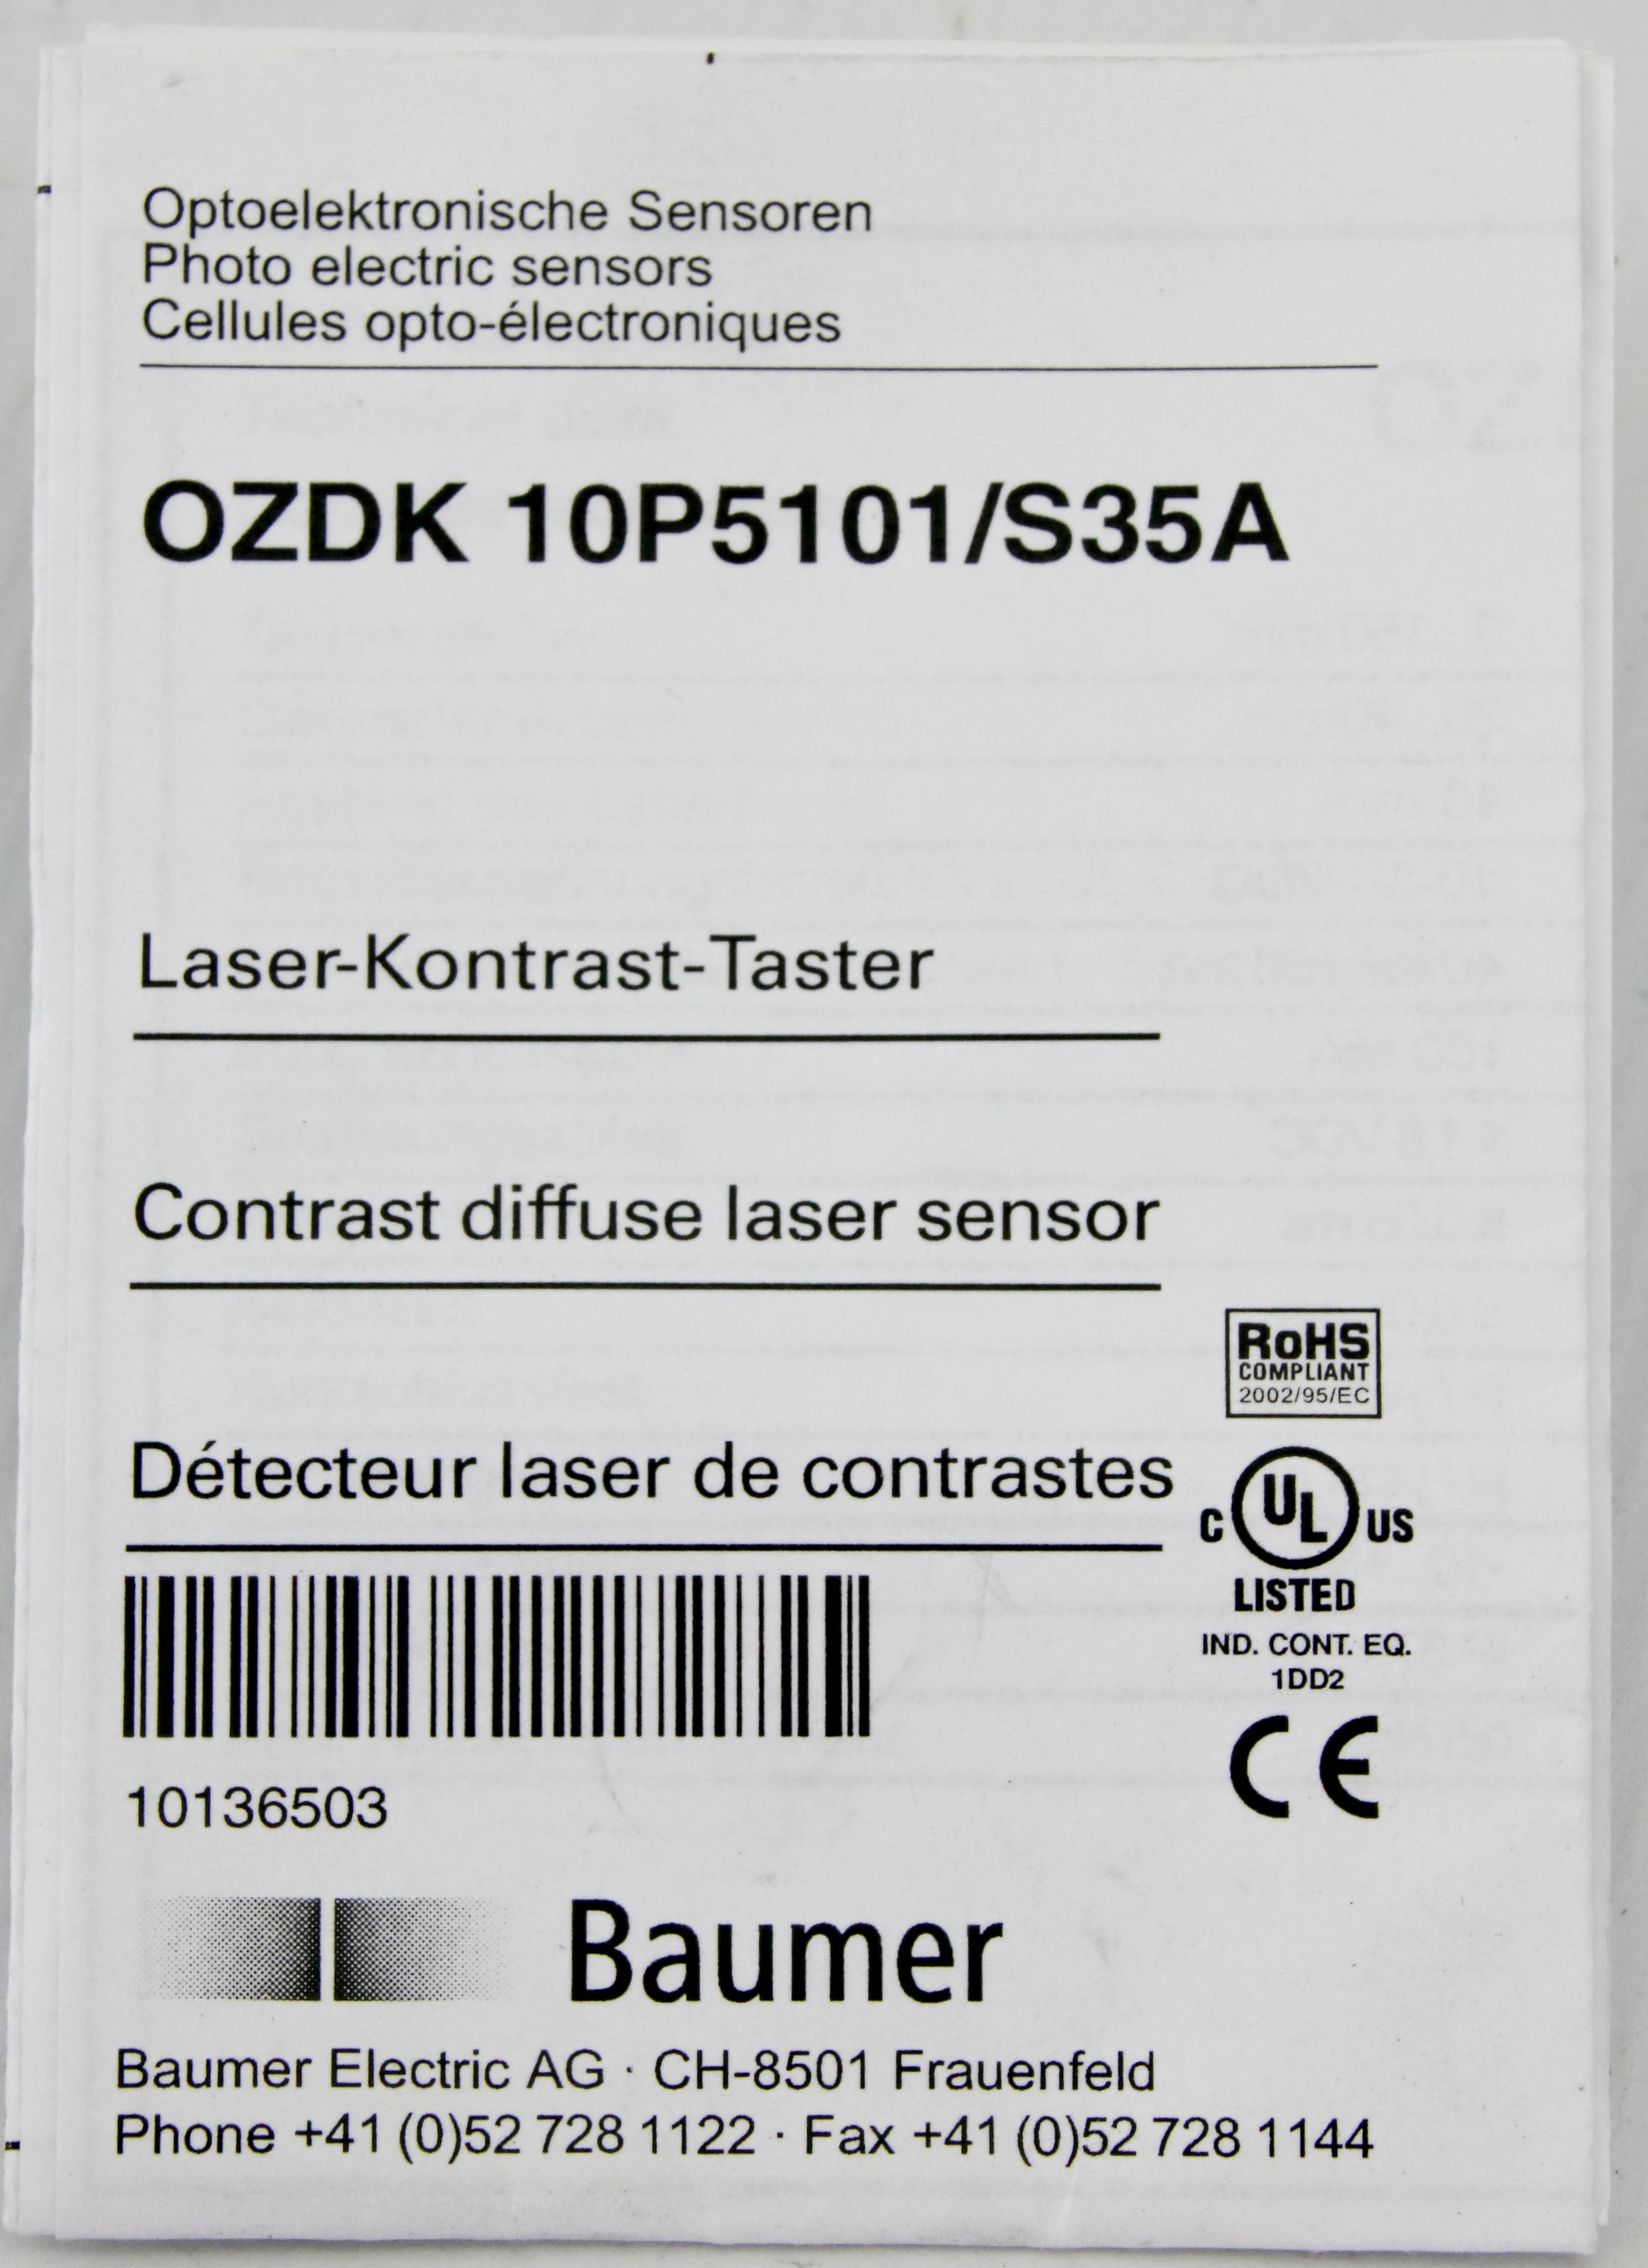 12149 BAUMER DIFFUSE PHOTOELECTRIC SENSOR (NEW) OZDK 10P5101/S35A  J316Gallery